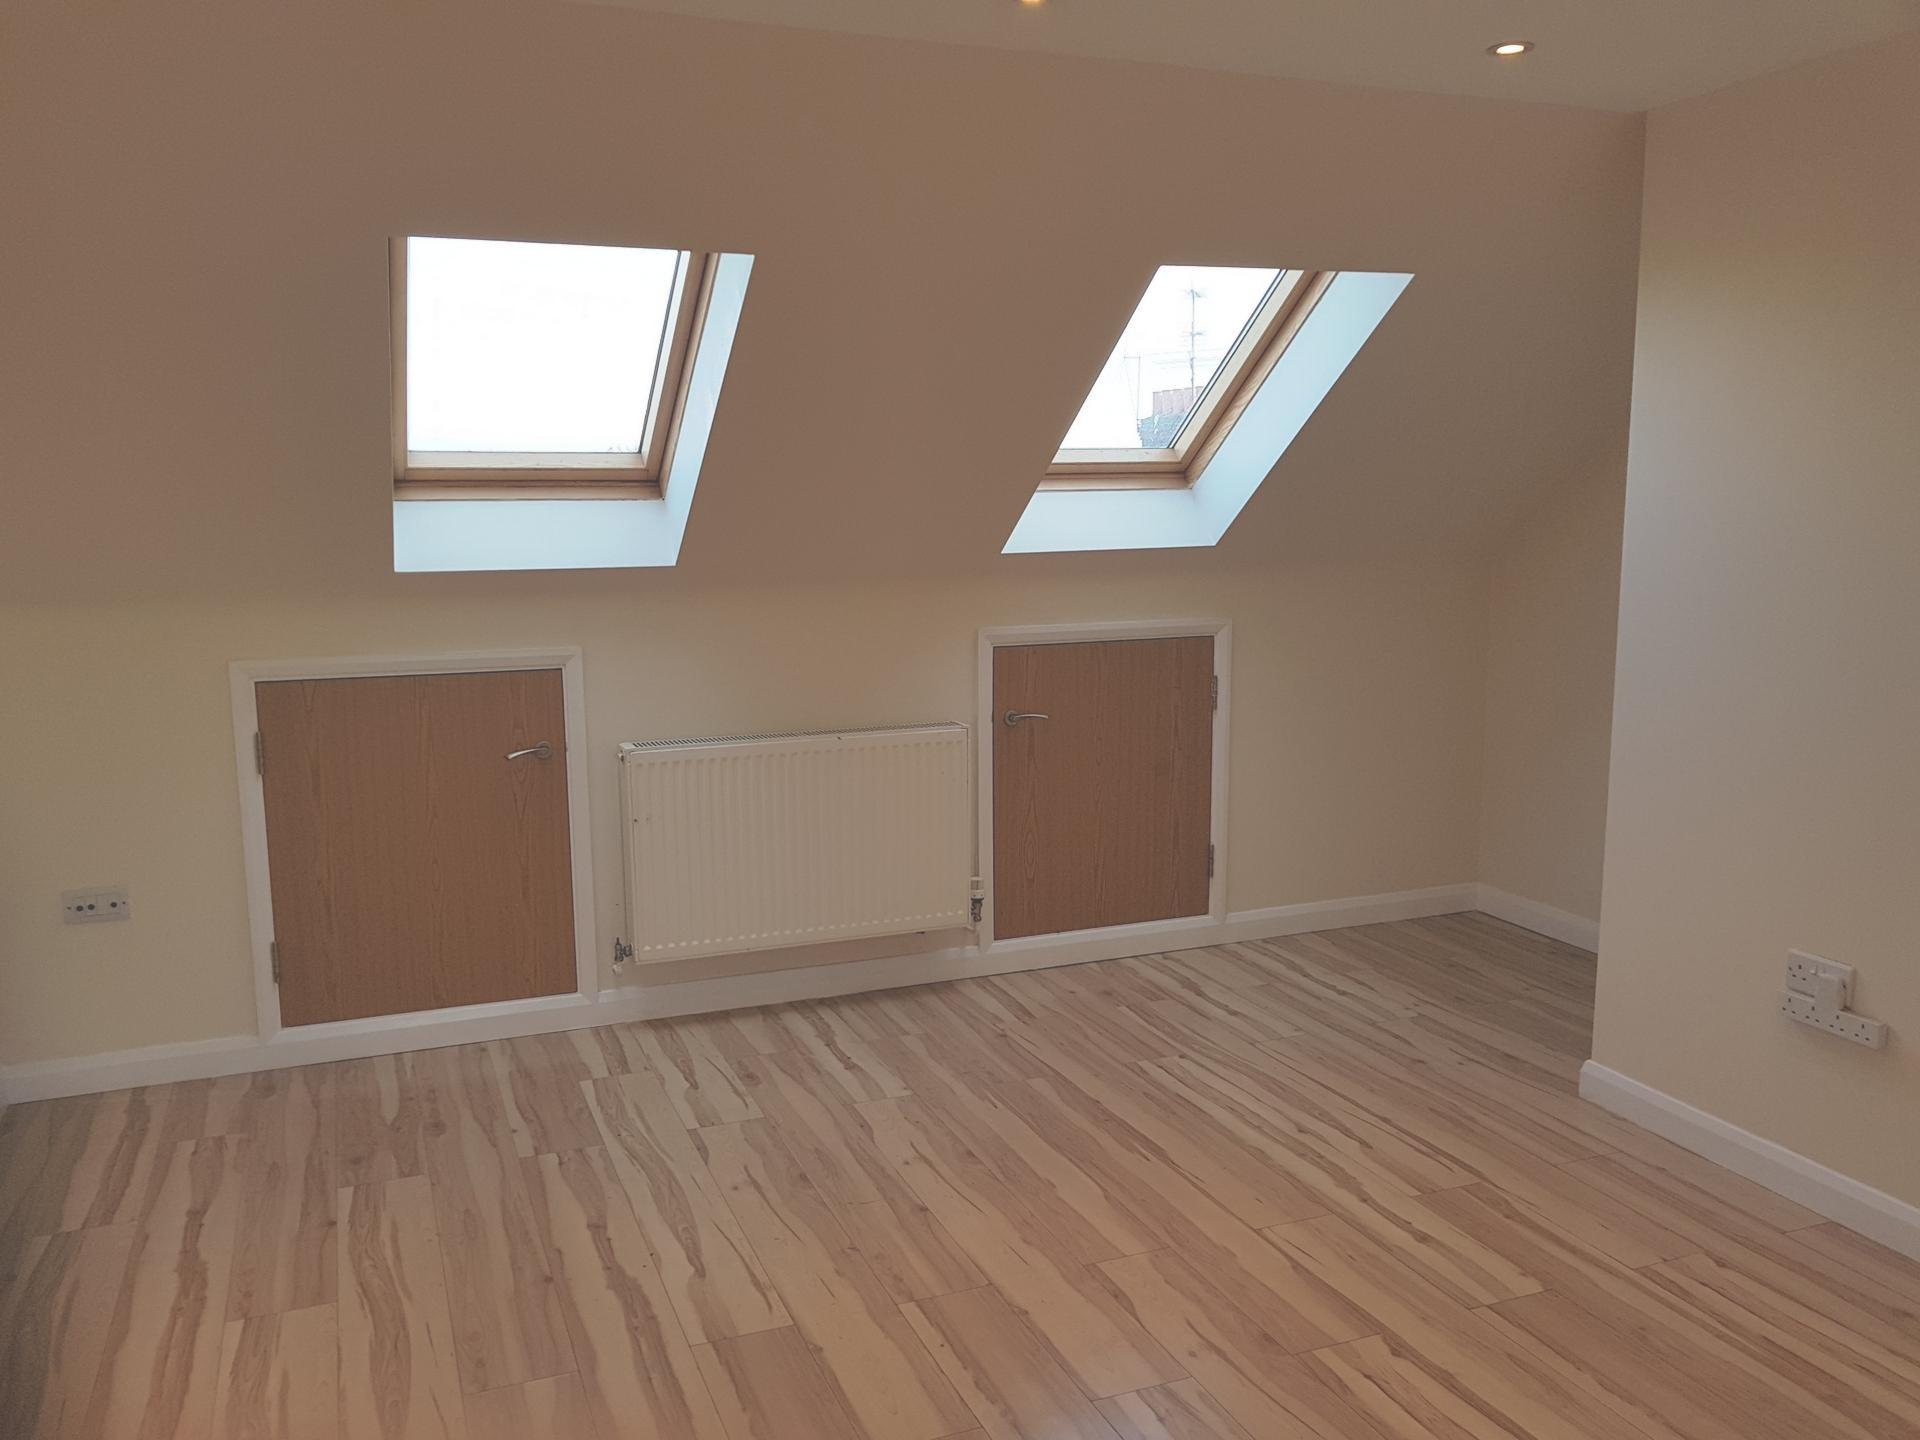 3 Bedroom Flat to rent in Hanwell, London, W7